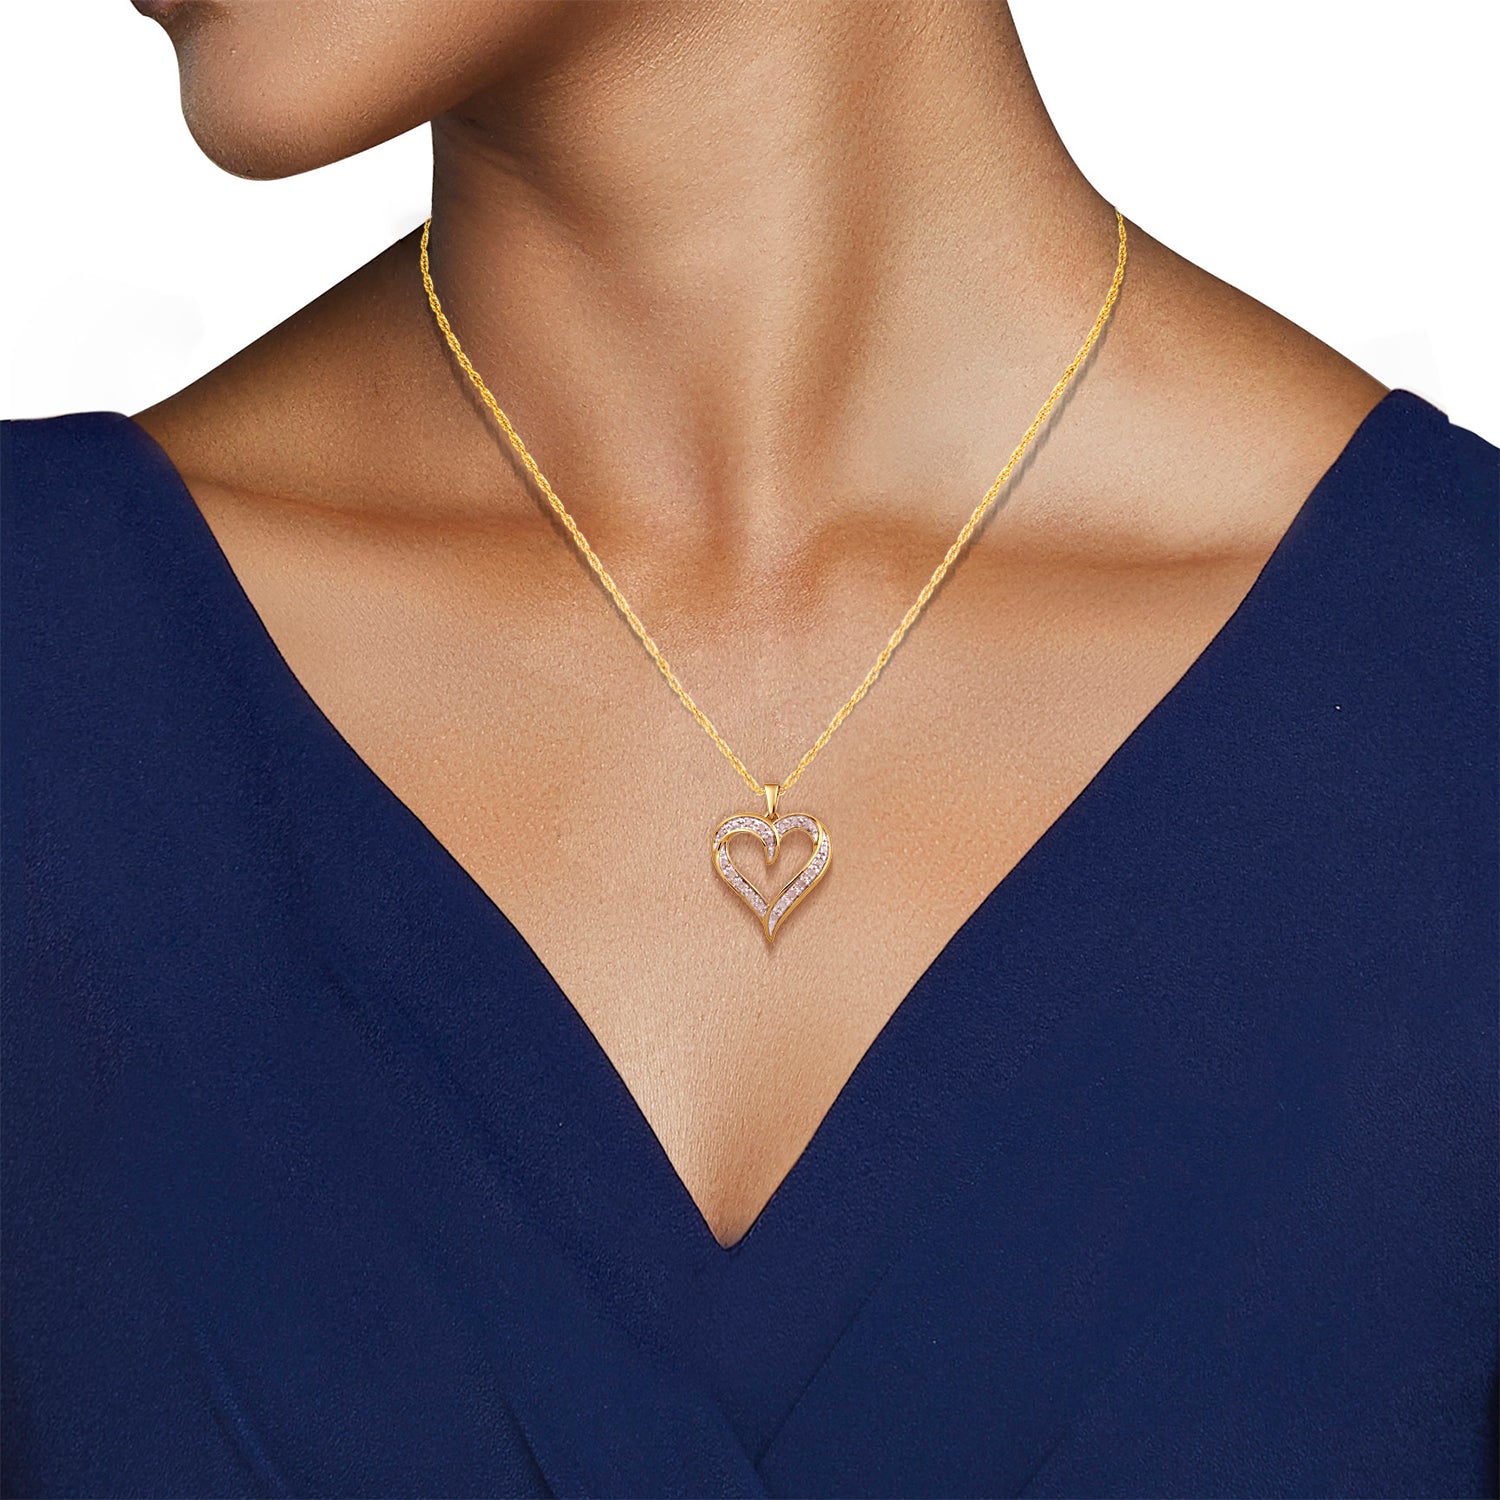 Jewelili Diamond Necklace Heart Jewelry in Yellow Gold Over Sterling Silver & 1/4 Cttw Diamond